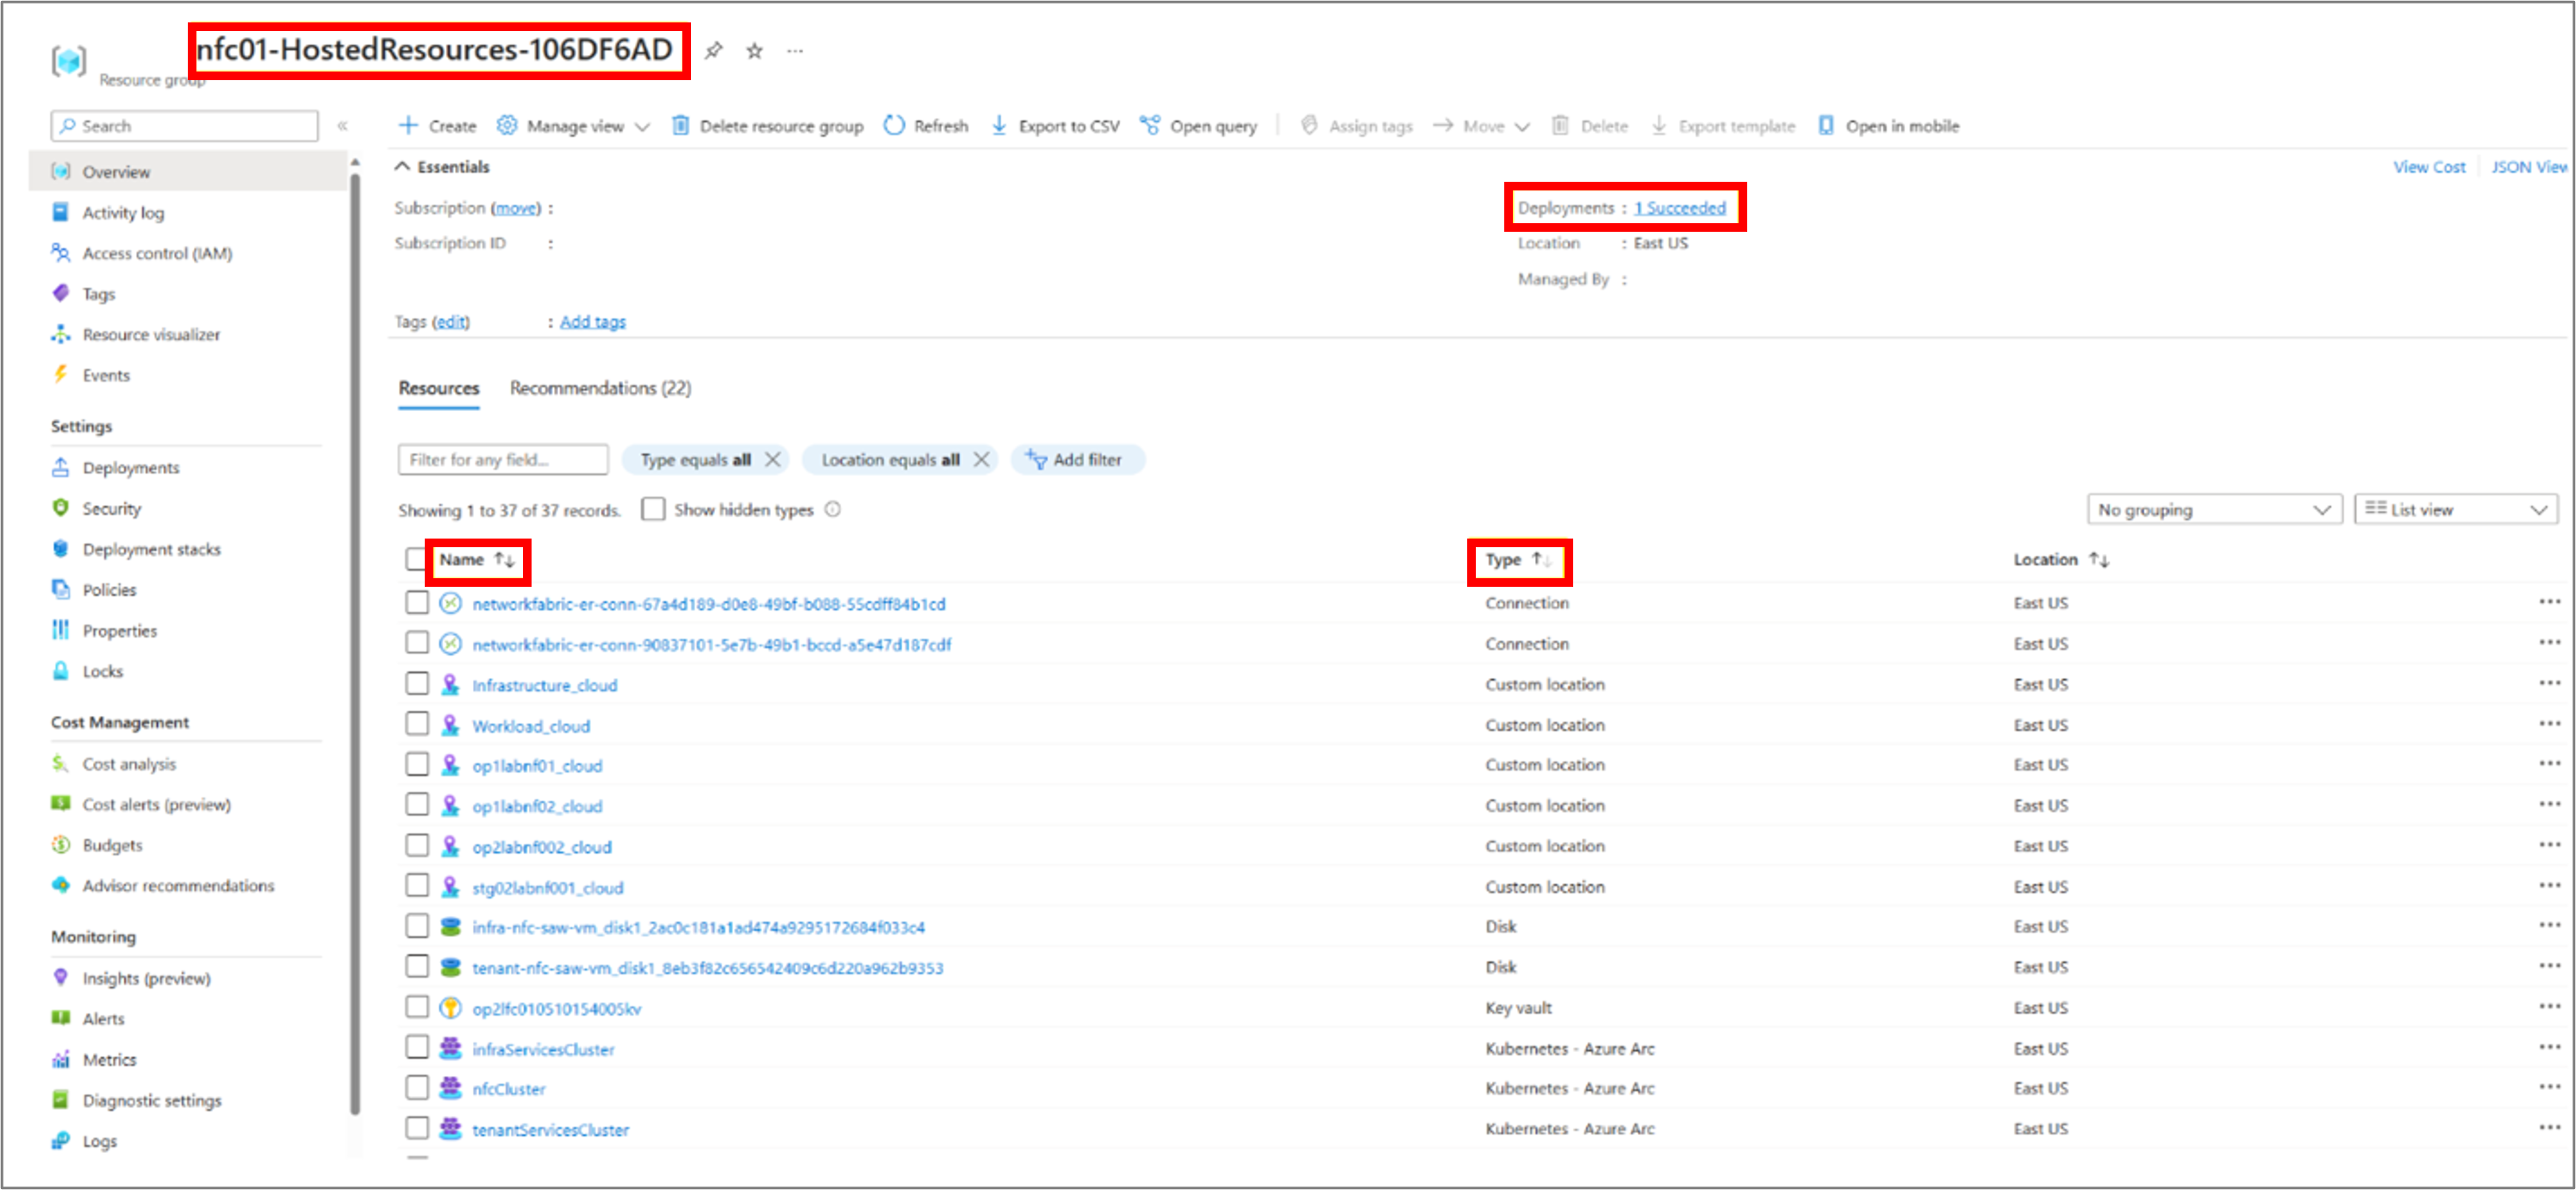 A screenshot from the Azure portal showing a successful deployment in the East US location.